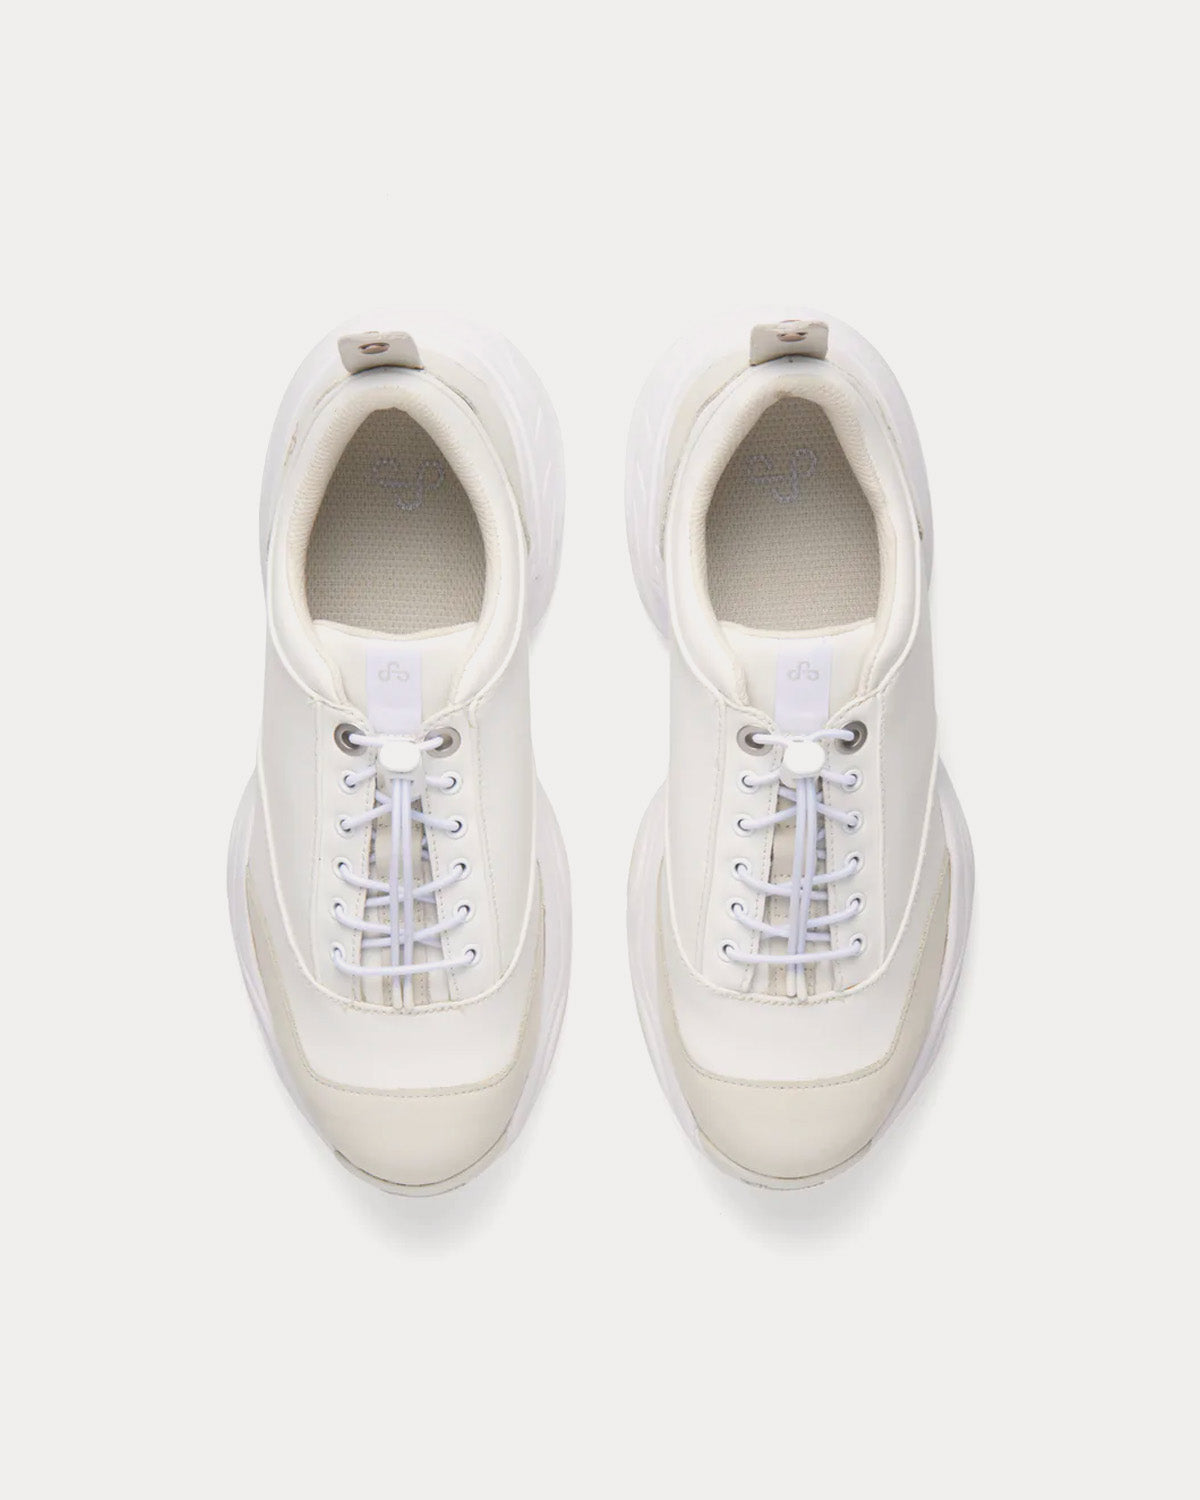 OAO - Auth White Low Top Sneakers